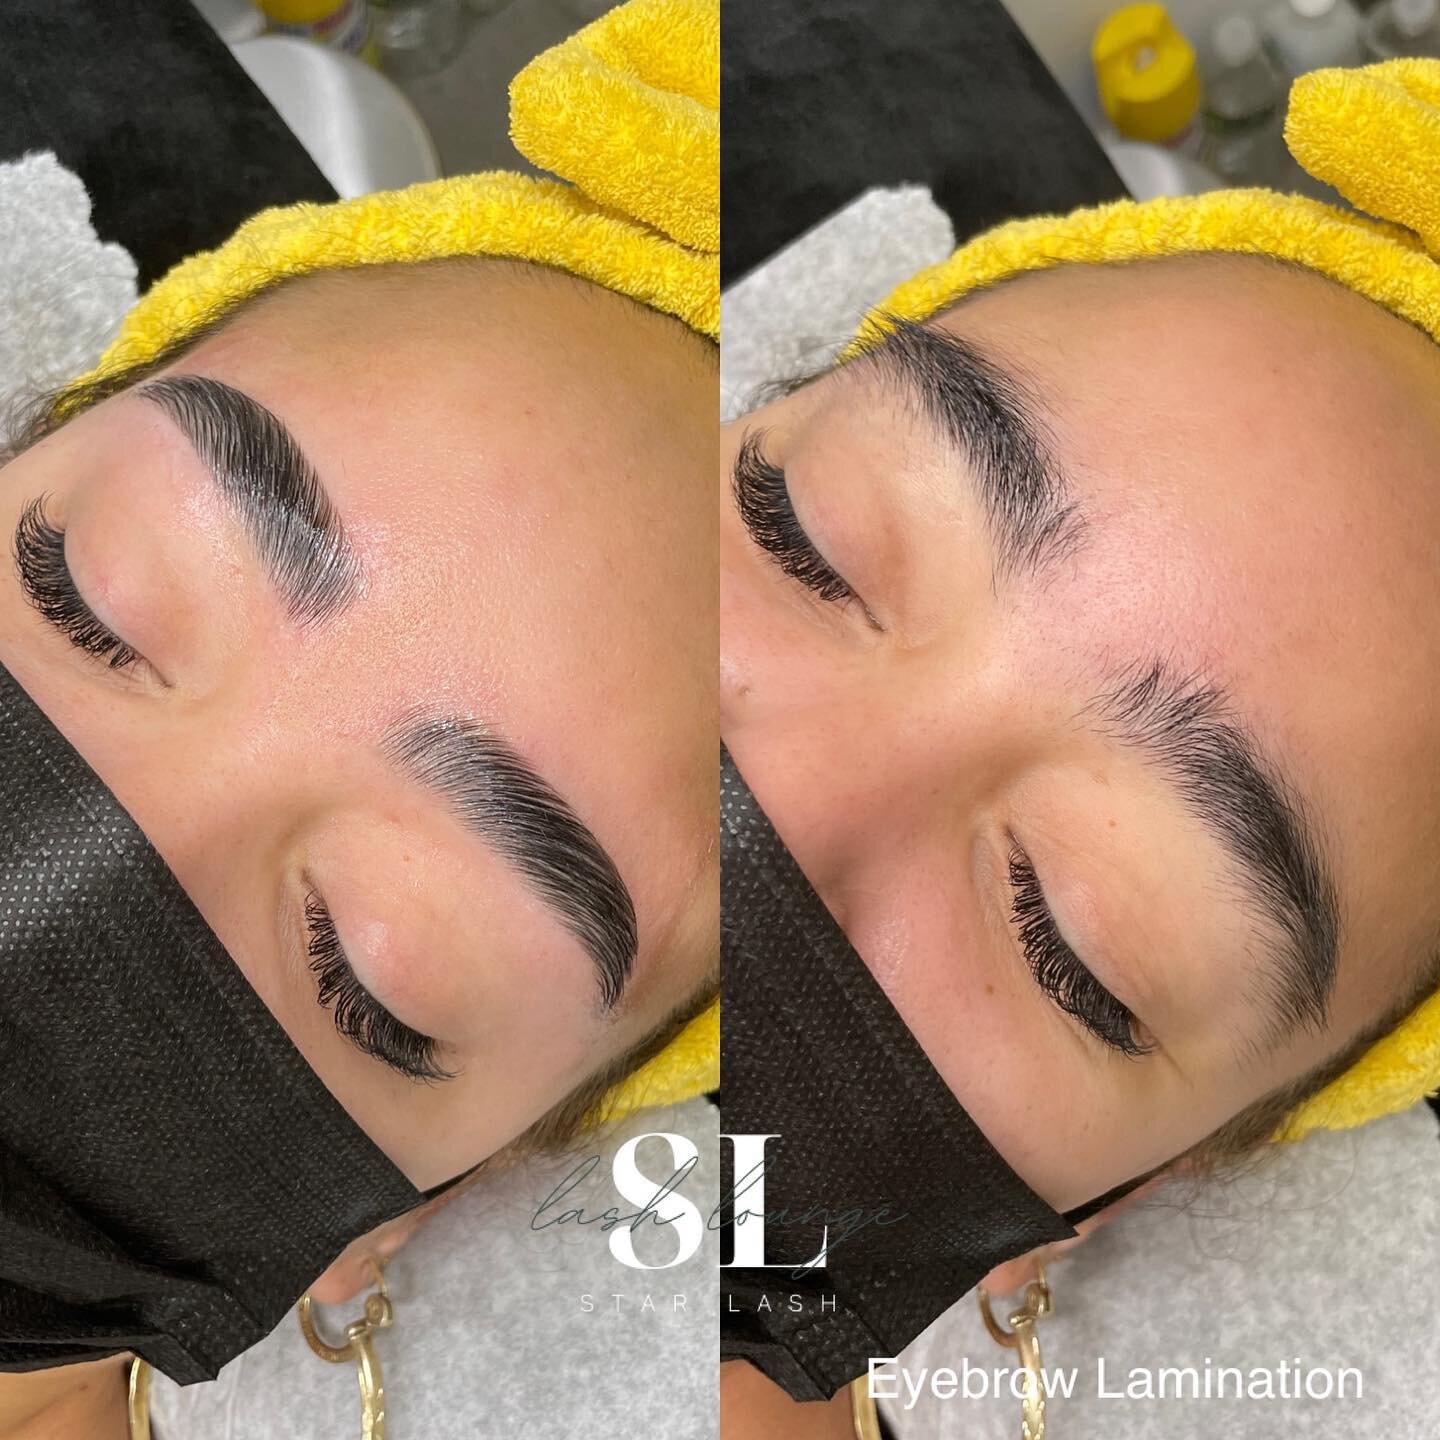 Eyebrow Lamination: before and after. Results last 5-7 weeks. Link in bio for booking ⭐️